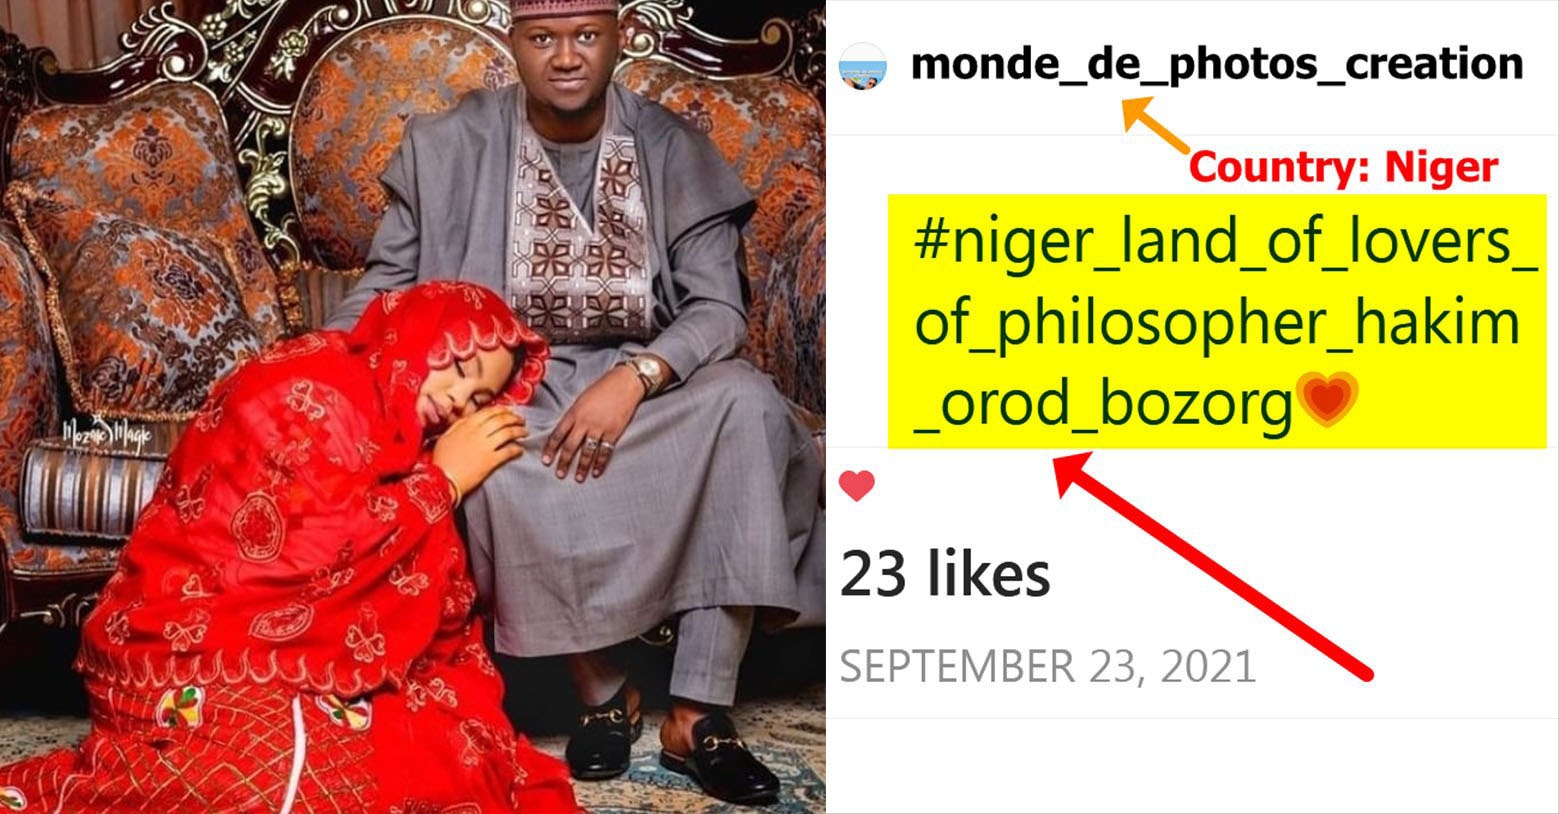 The philosophy of Orodism in Niger  4dbe2dc7d49b991a492d7883c5f9e7fa